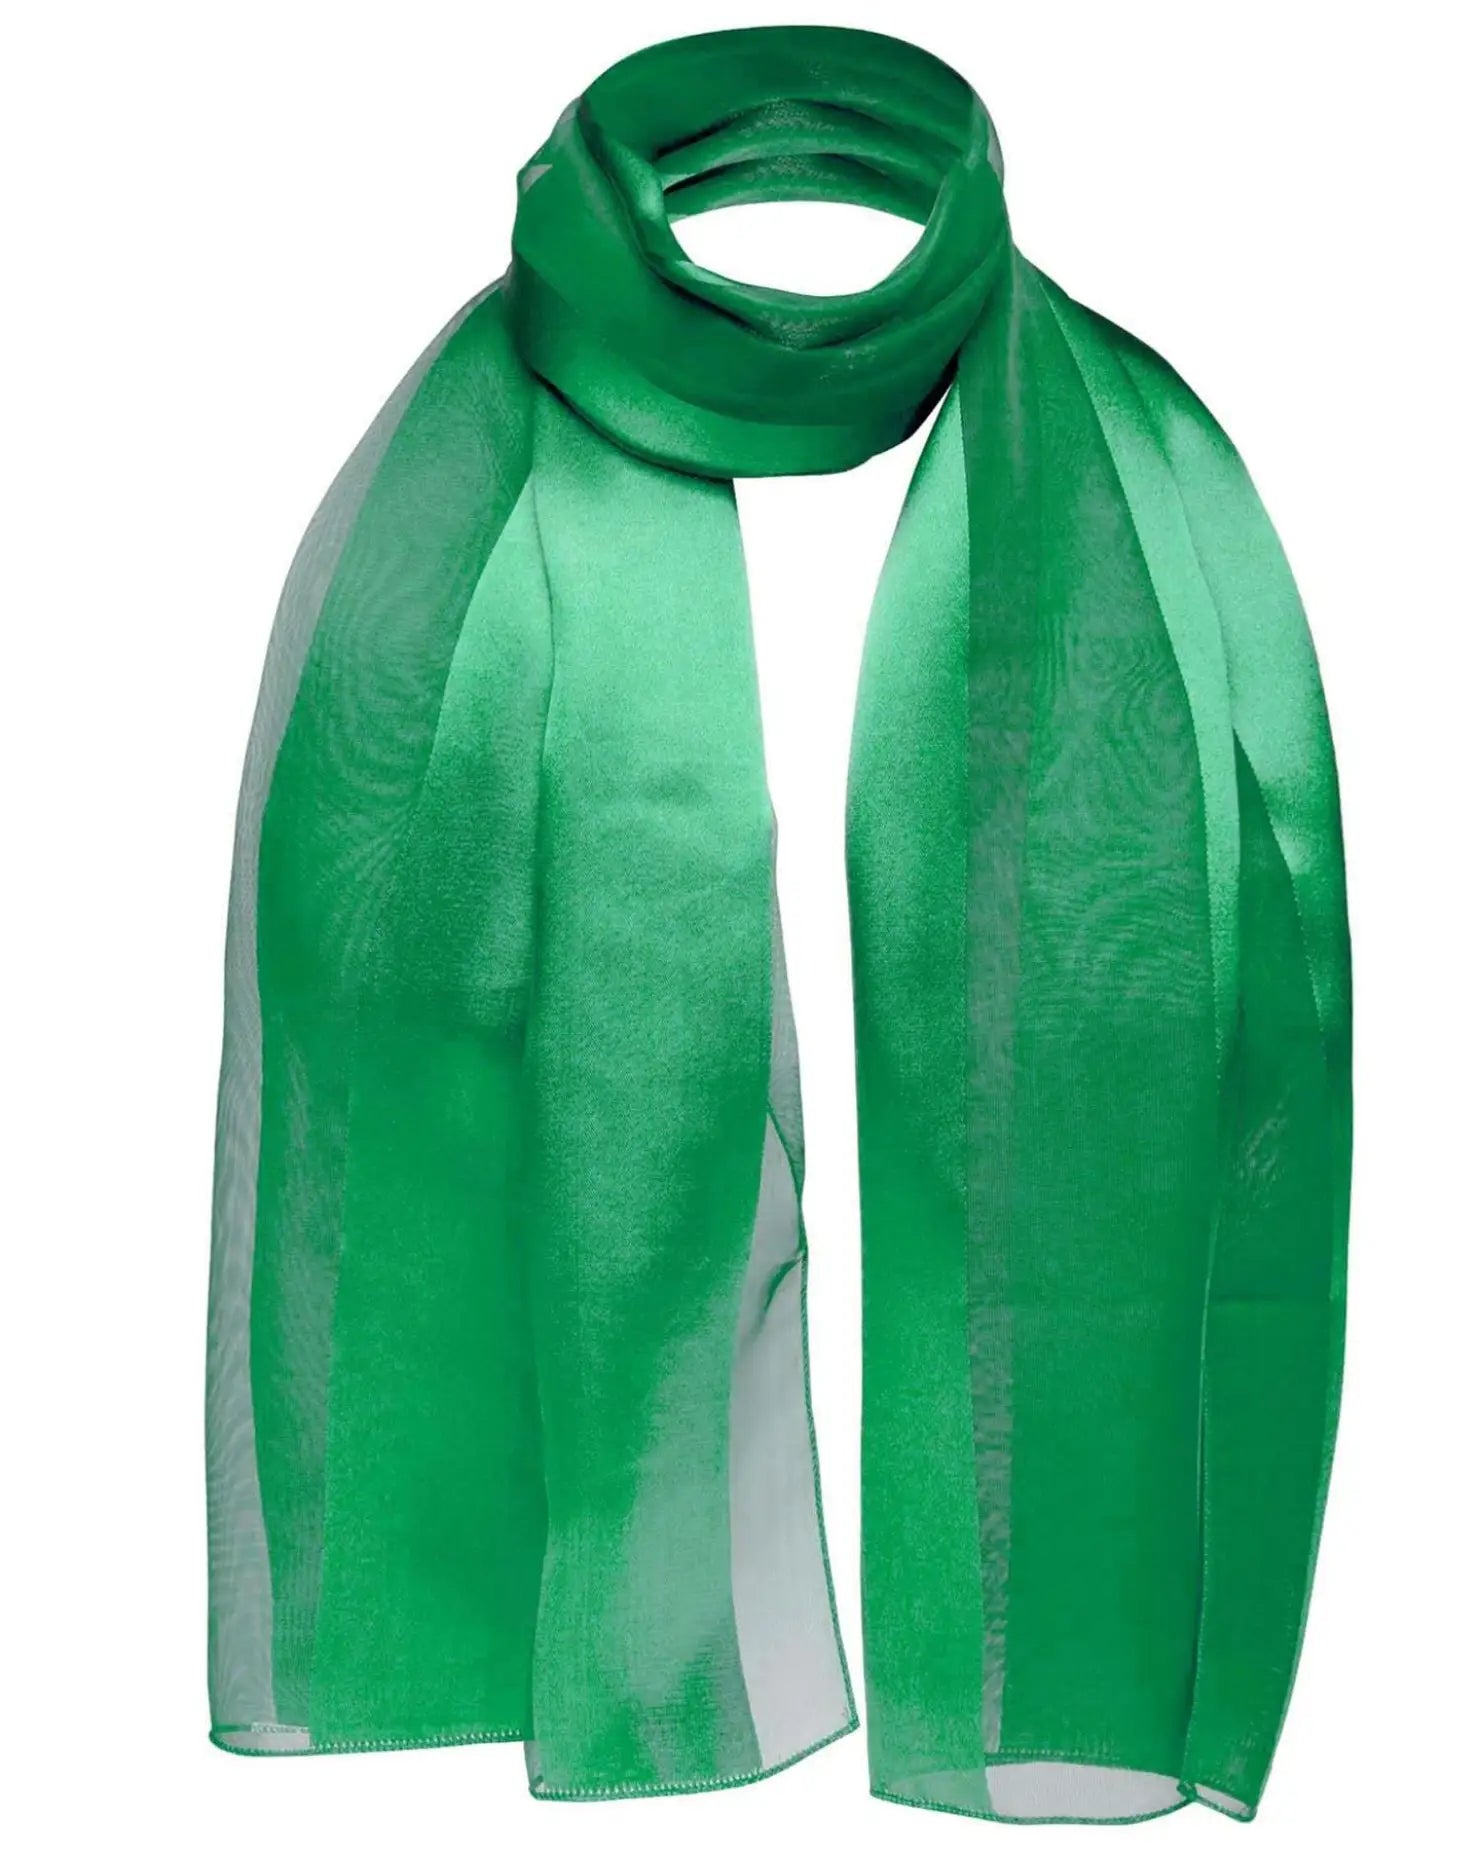 Solid Shimmering Satin Stripe Scarf - Lightweight in Green with White Stripe